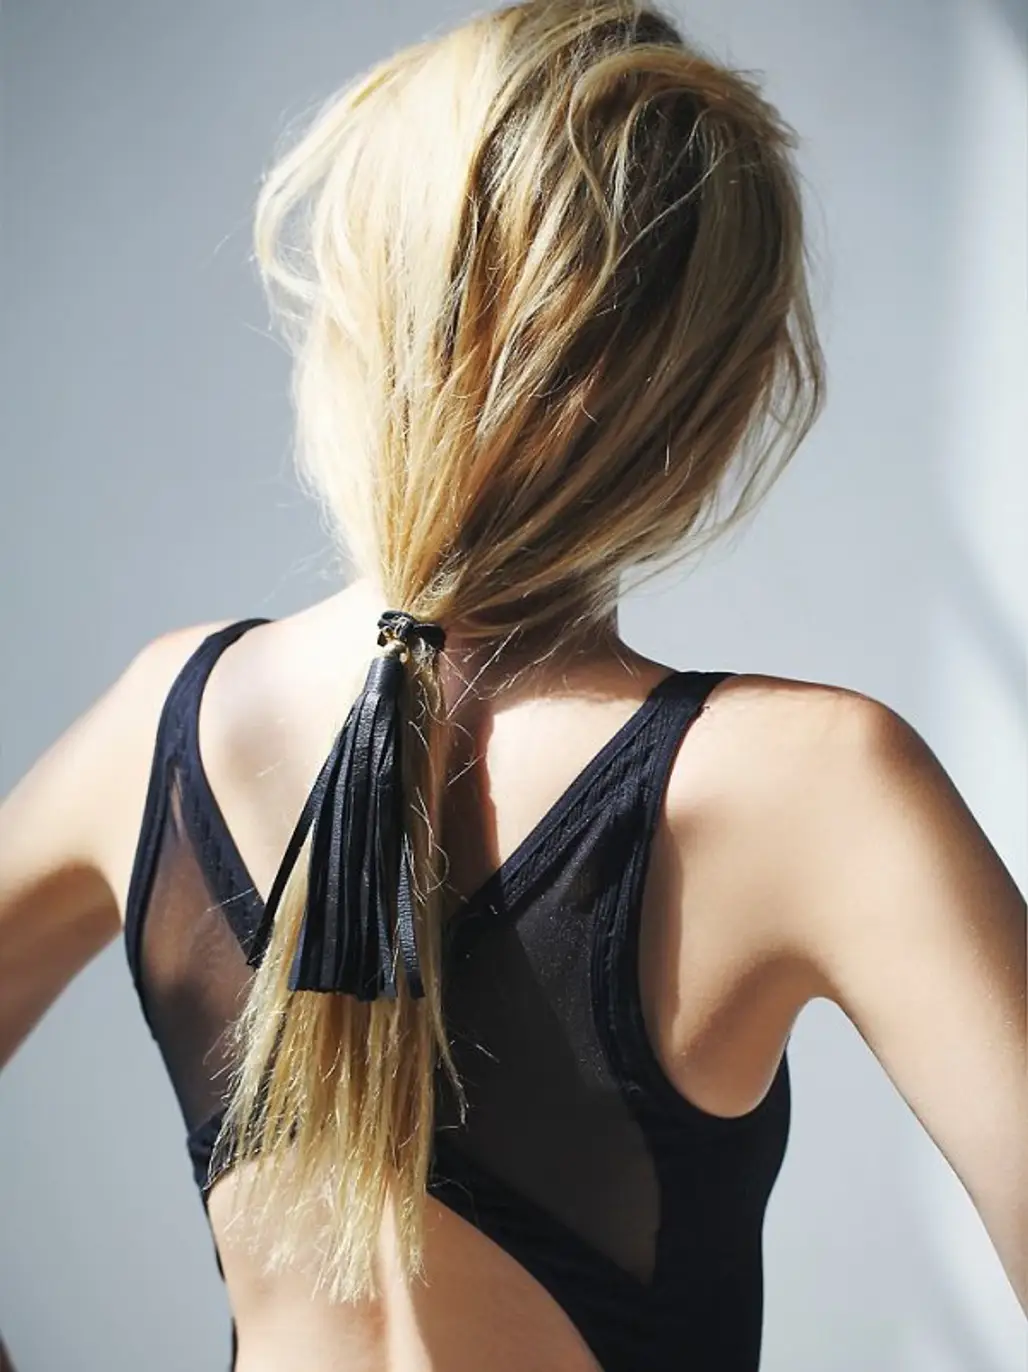 Leather Hair Accessories Are Trending Right Now